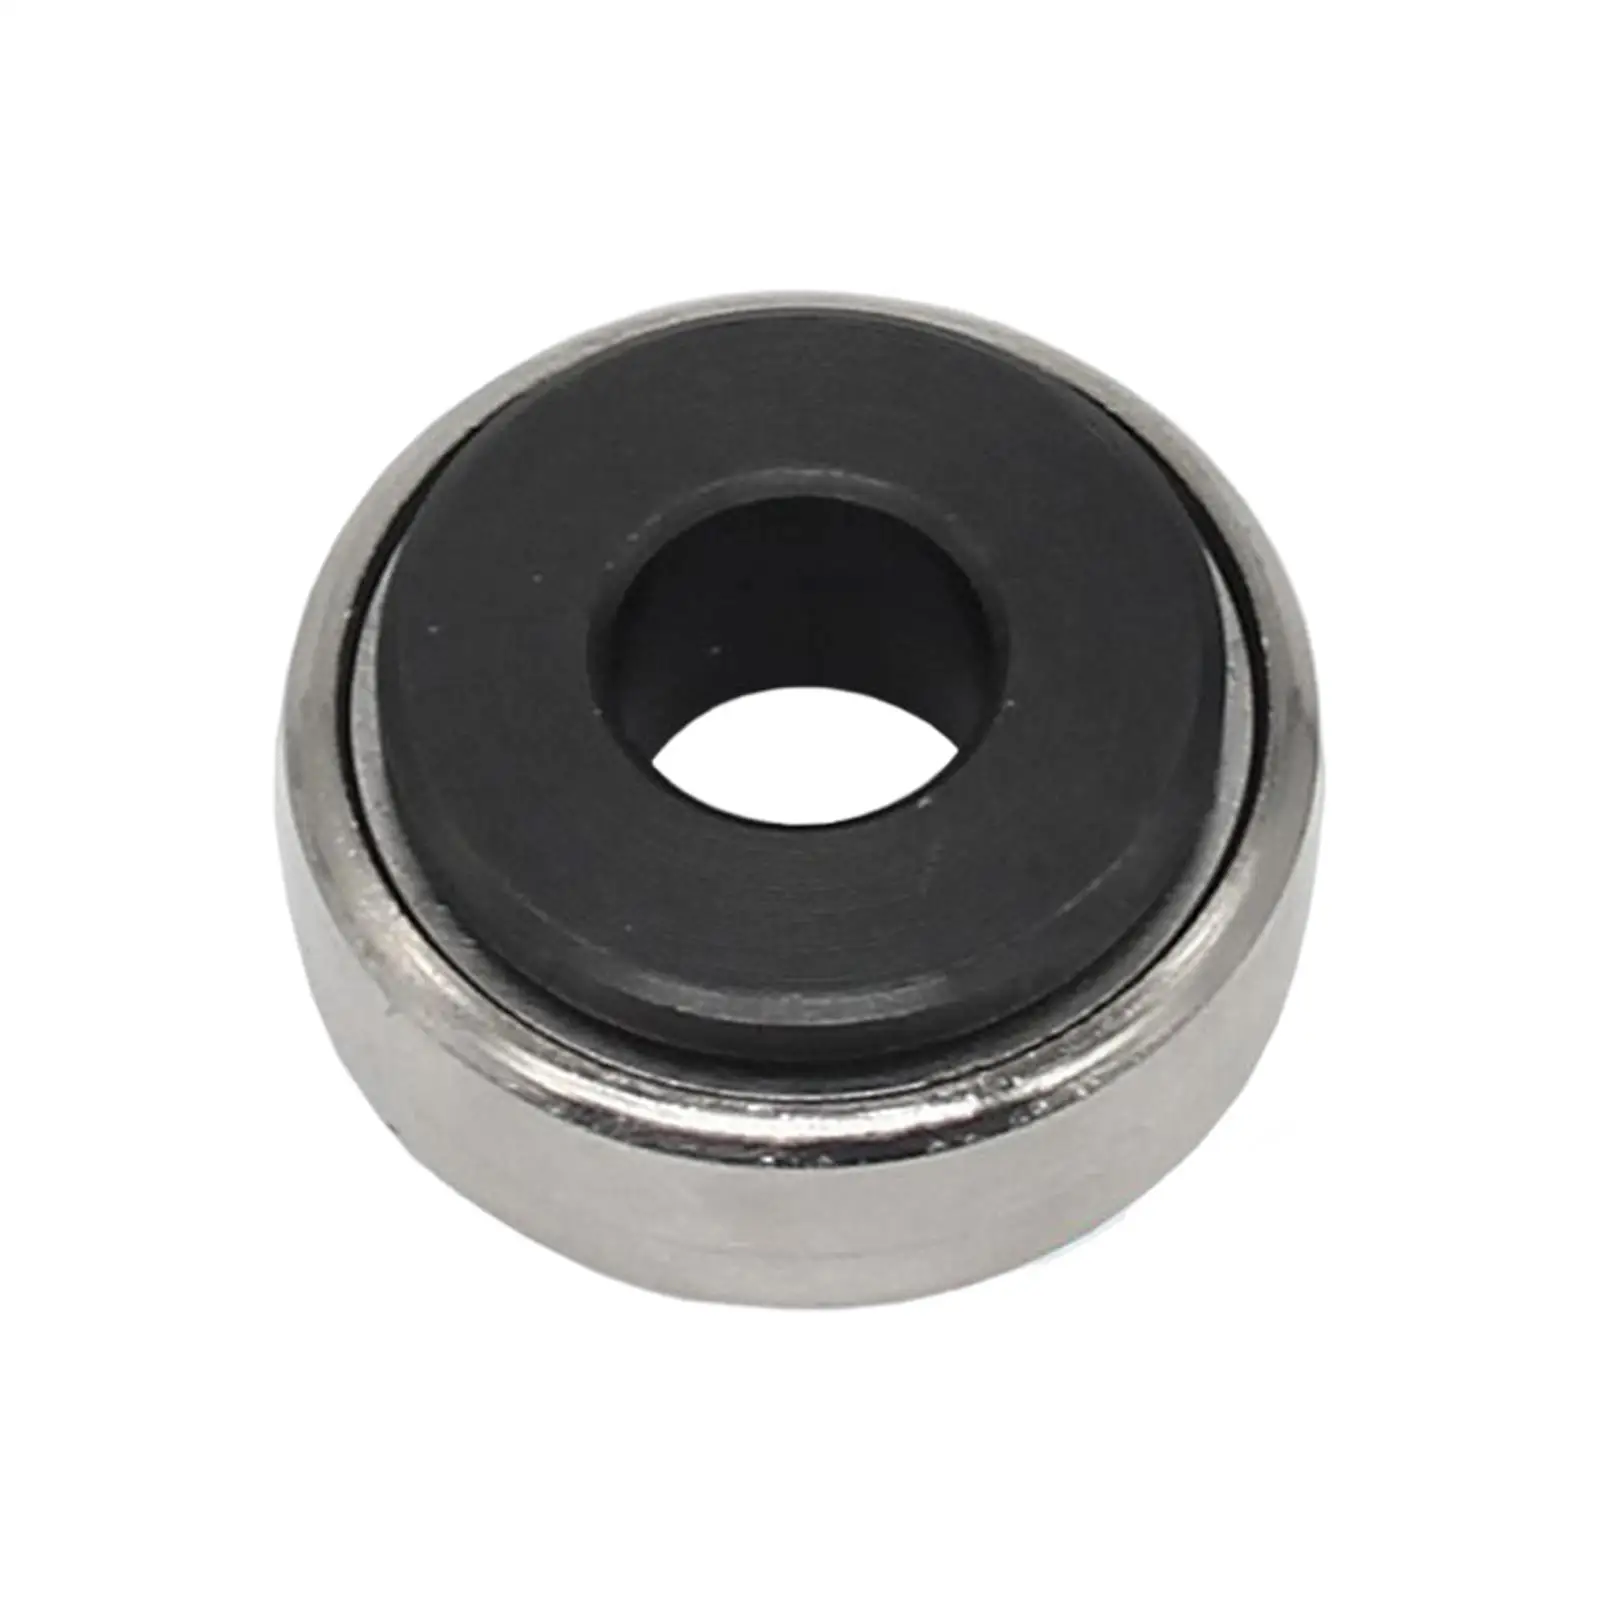 

Durable Wheel Stud Installer 24234 for Car Trucks Wheel Stud up to 14mm 9/16" Diameter Use with Impact Wrench